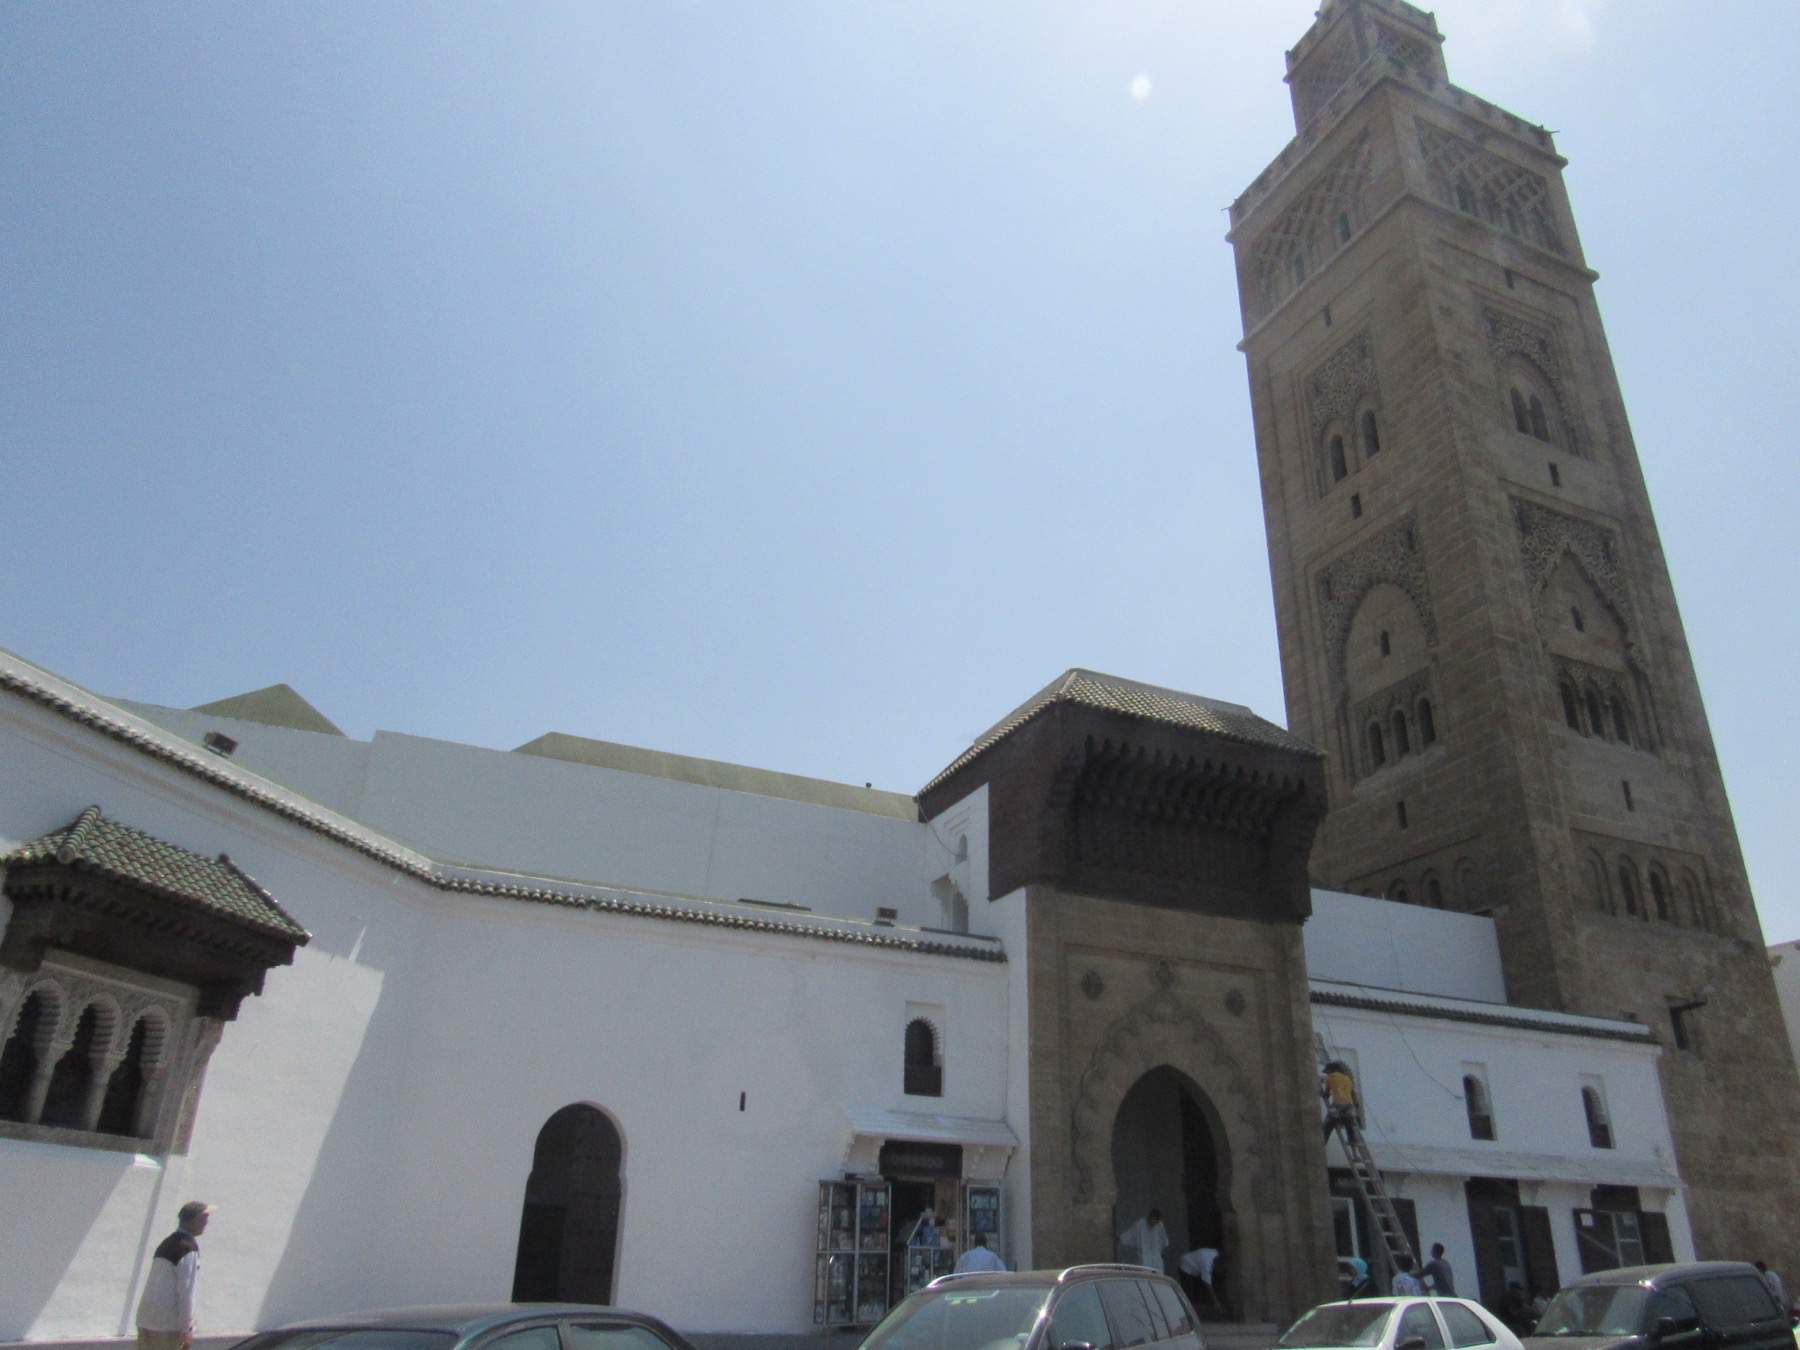 Exterior view of Masjid Mohamedi with minaret and entrance.